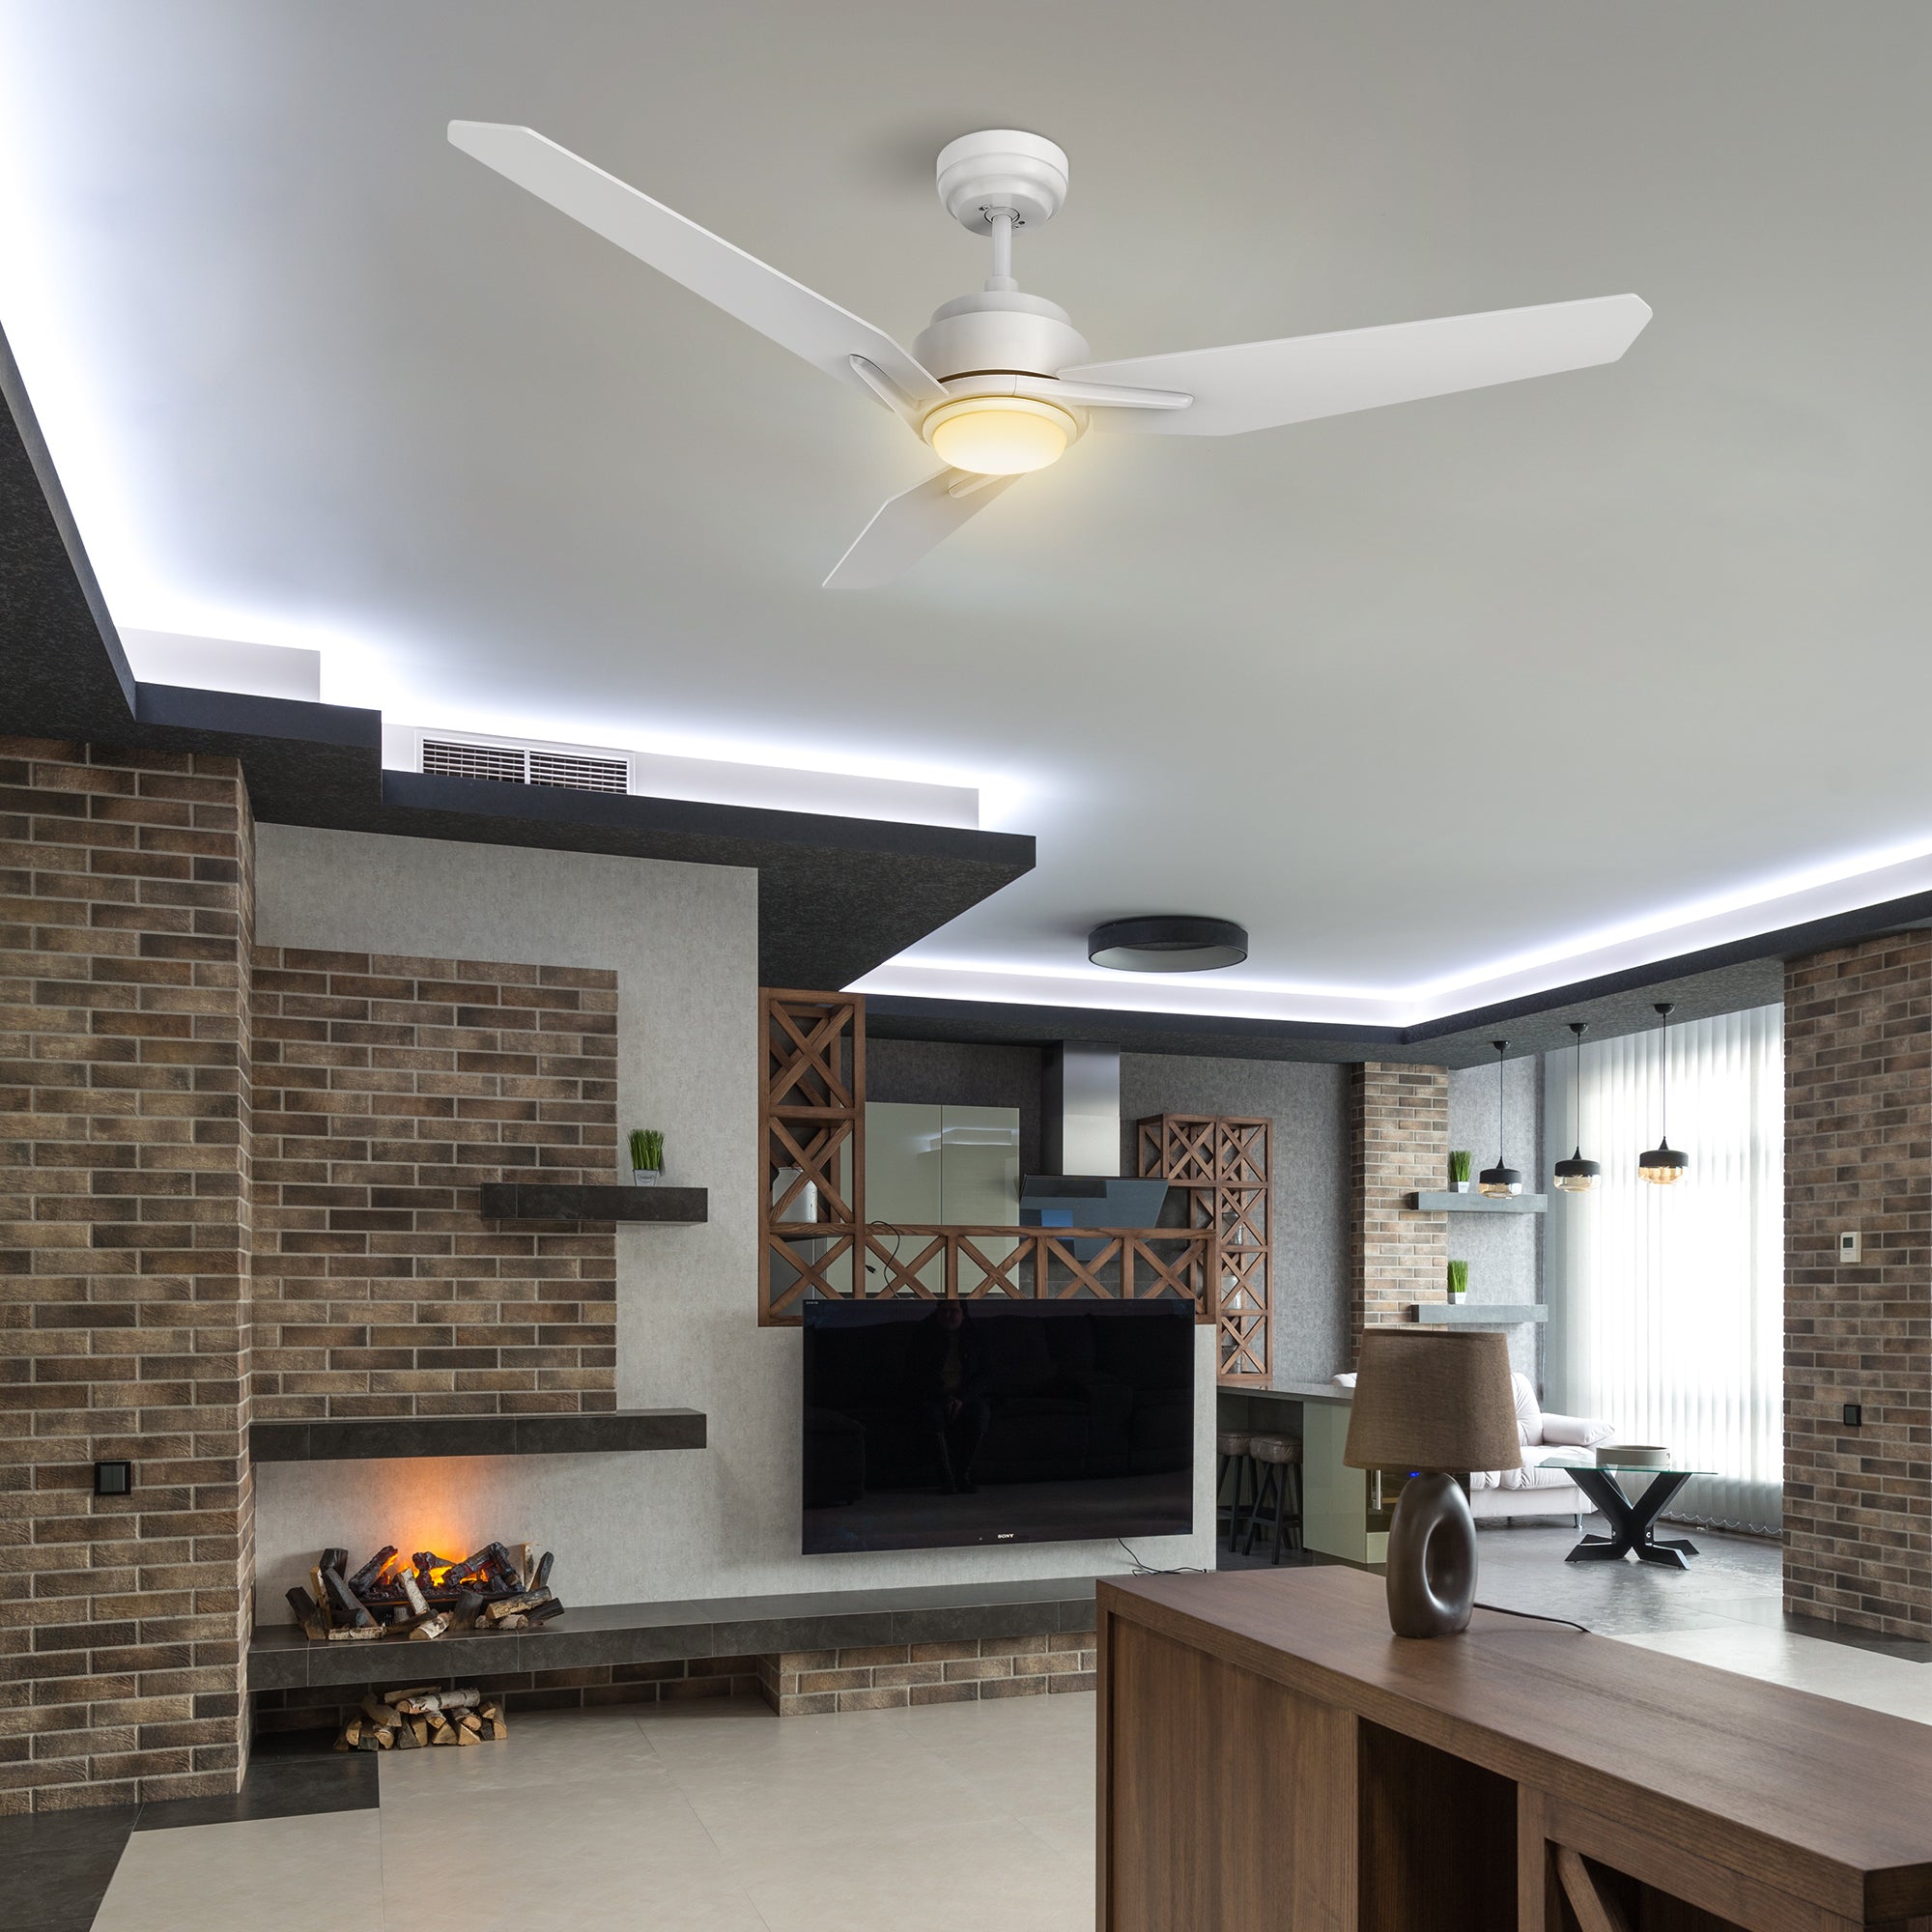 This Tilbury 56&#39;&#39; smart ceiling fan keeps your space cool, bright, and stylish. It is a soft modern masterpiece perfect for your large indoor living spaces. This Wifi smart ceiling fan is a simplicity designing with White finish, use elegant Plywood blades and has an integrated 4000K LED cool light. The fan features Remote control, Wi-Fi apps, Siri Shortcut and Voice control technology (compatible with Amazon Alexa and Google Home Assistant ) to set fan preferences.